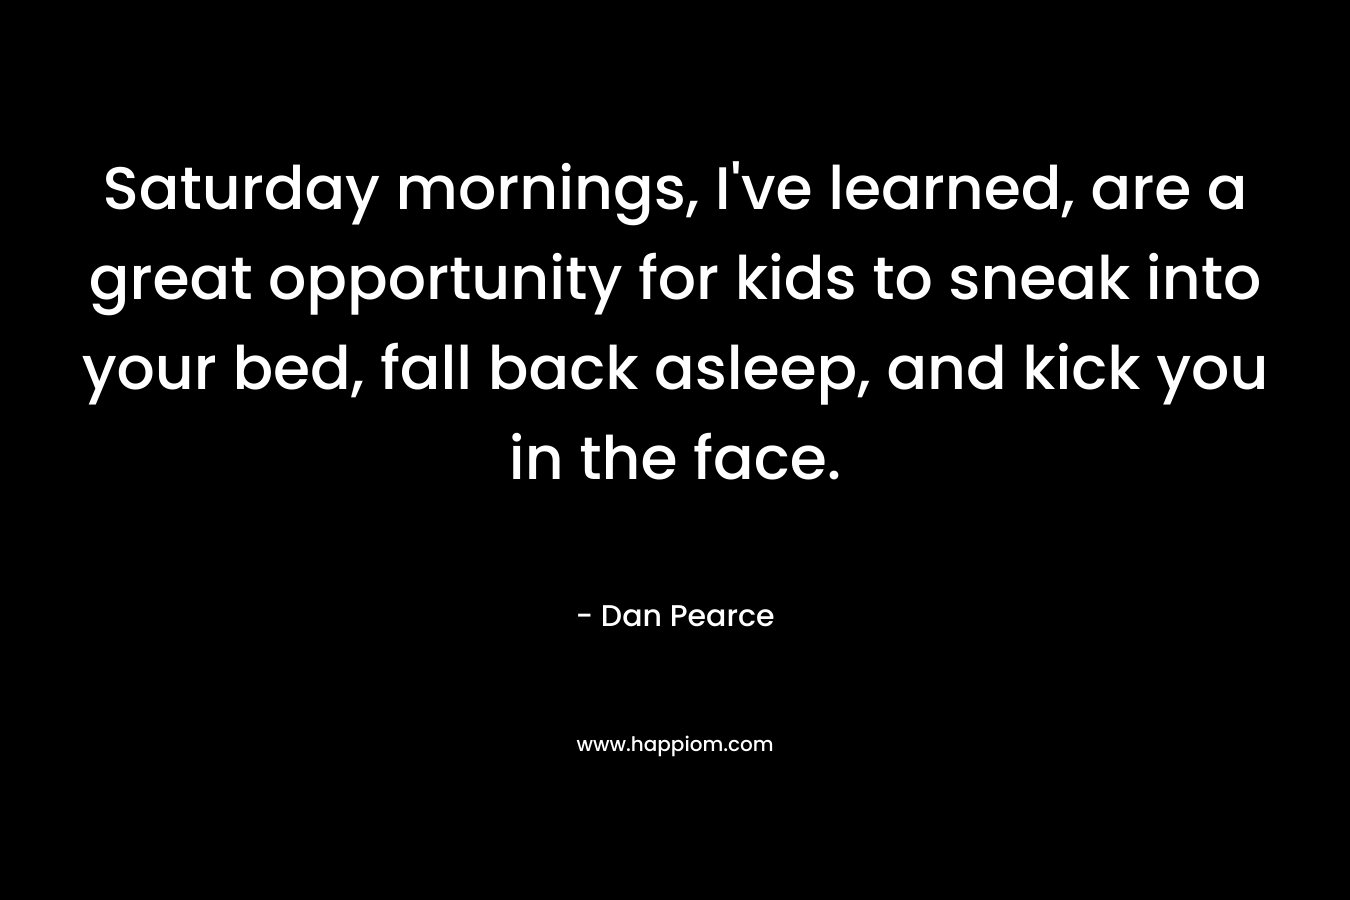 Saturday mornings, I've learned, are a great opportunity for kids to sneak into your bed, fall back asleep, and kick you in the face.